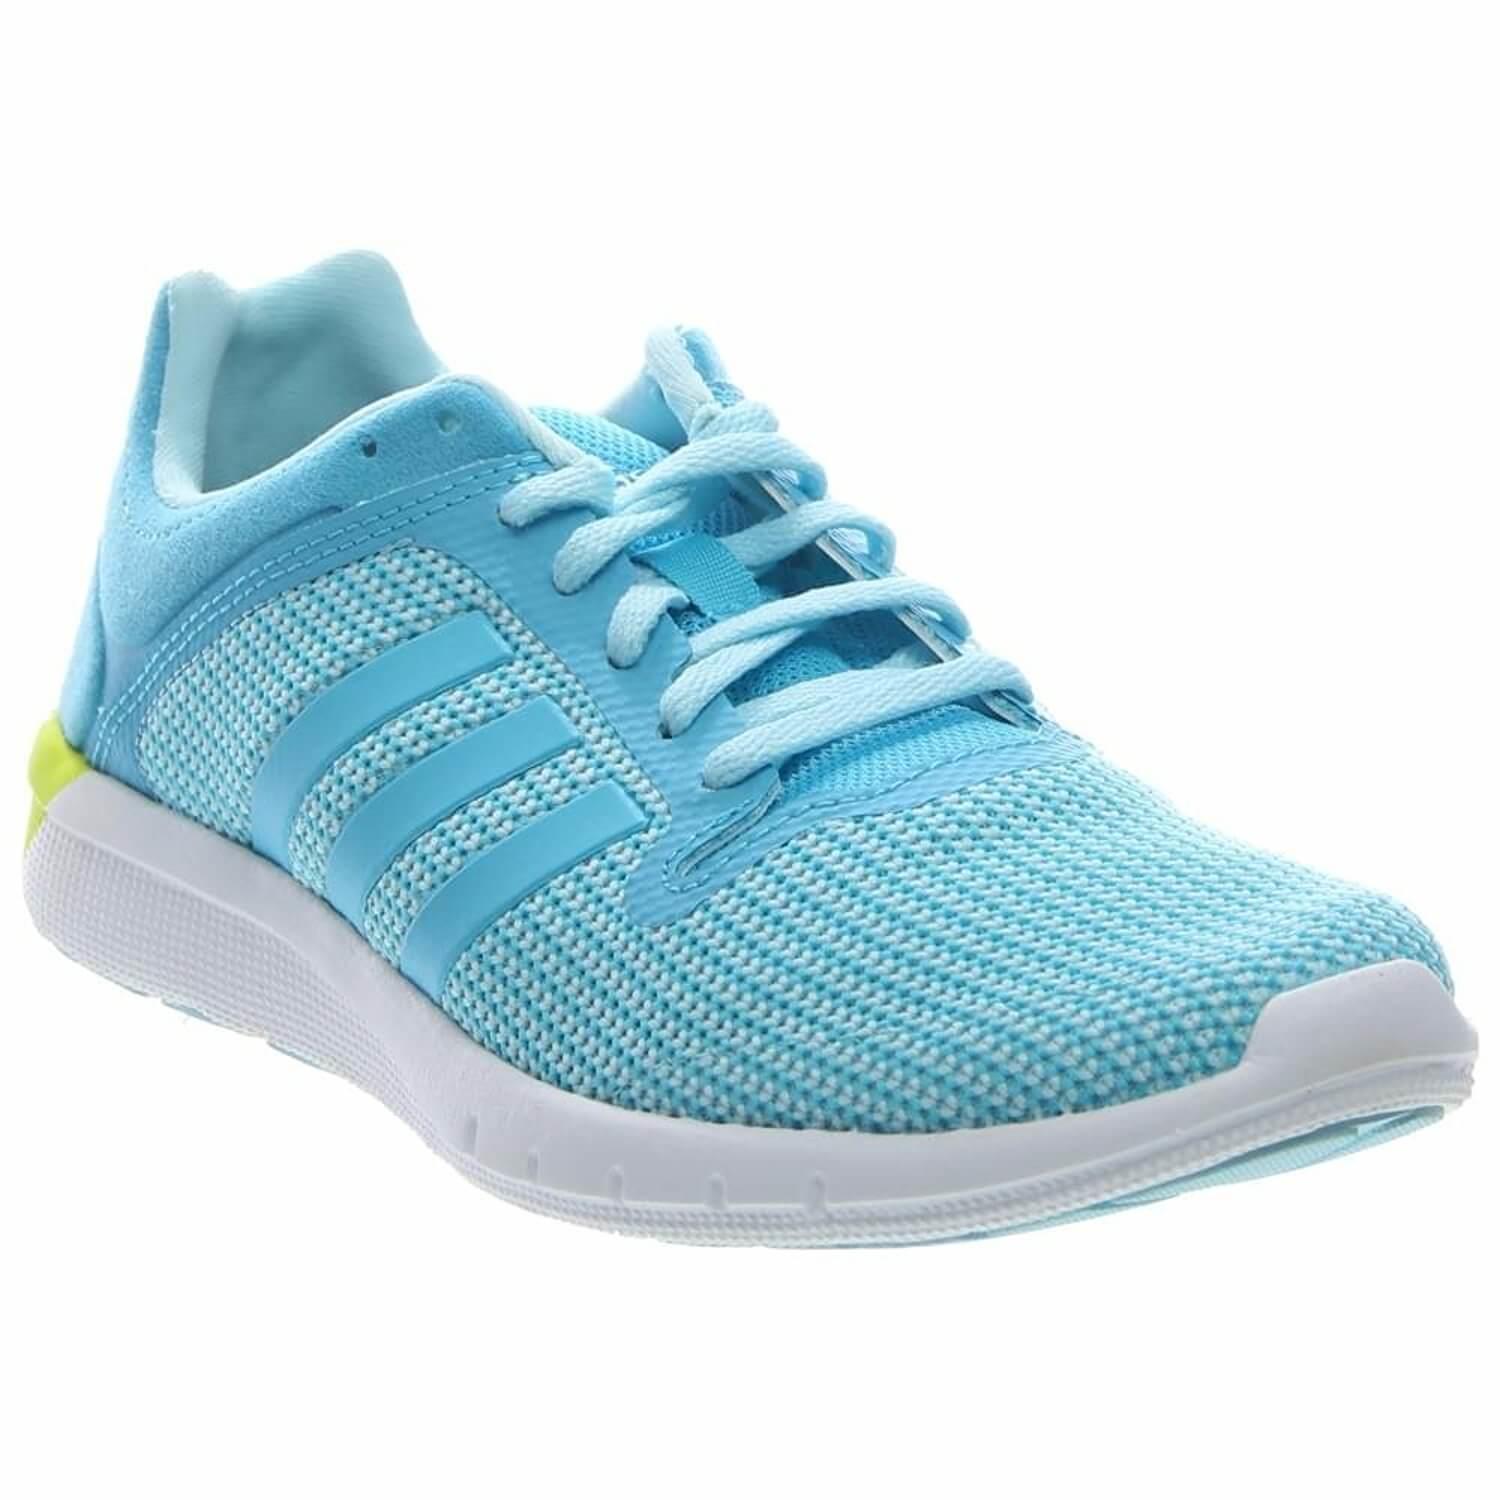 adidas climacool fresh 2.0 review